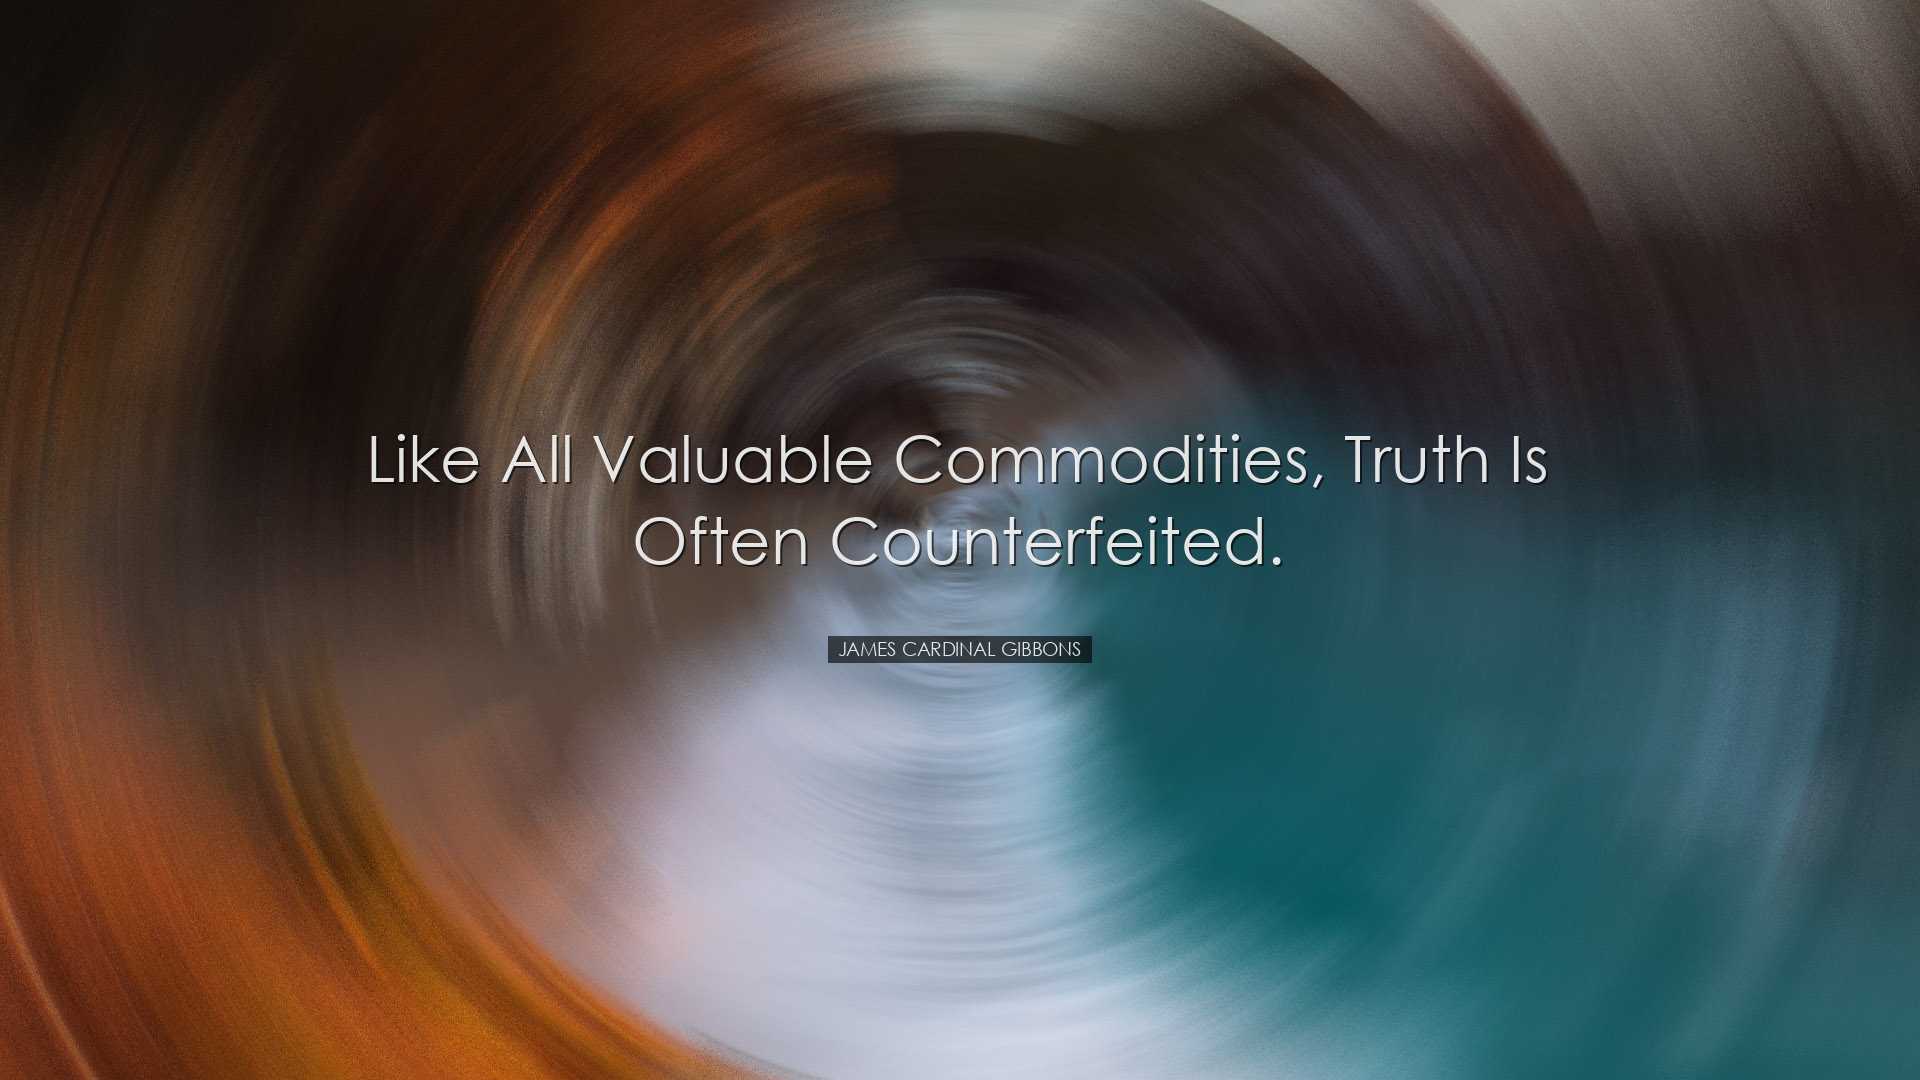 Like all valuable commodities, truth is often counterfeited. - Jam